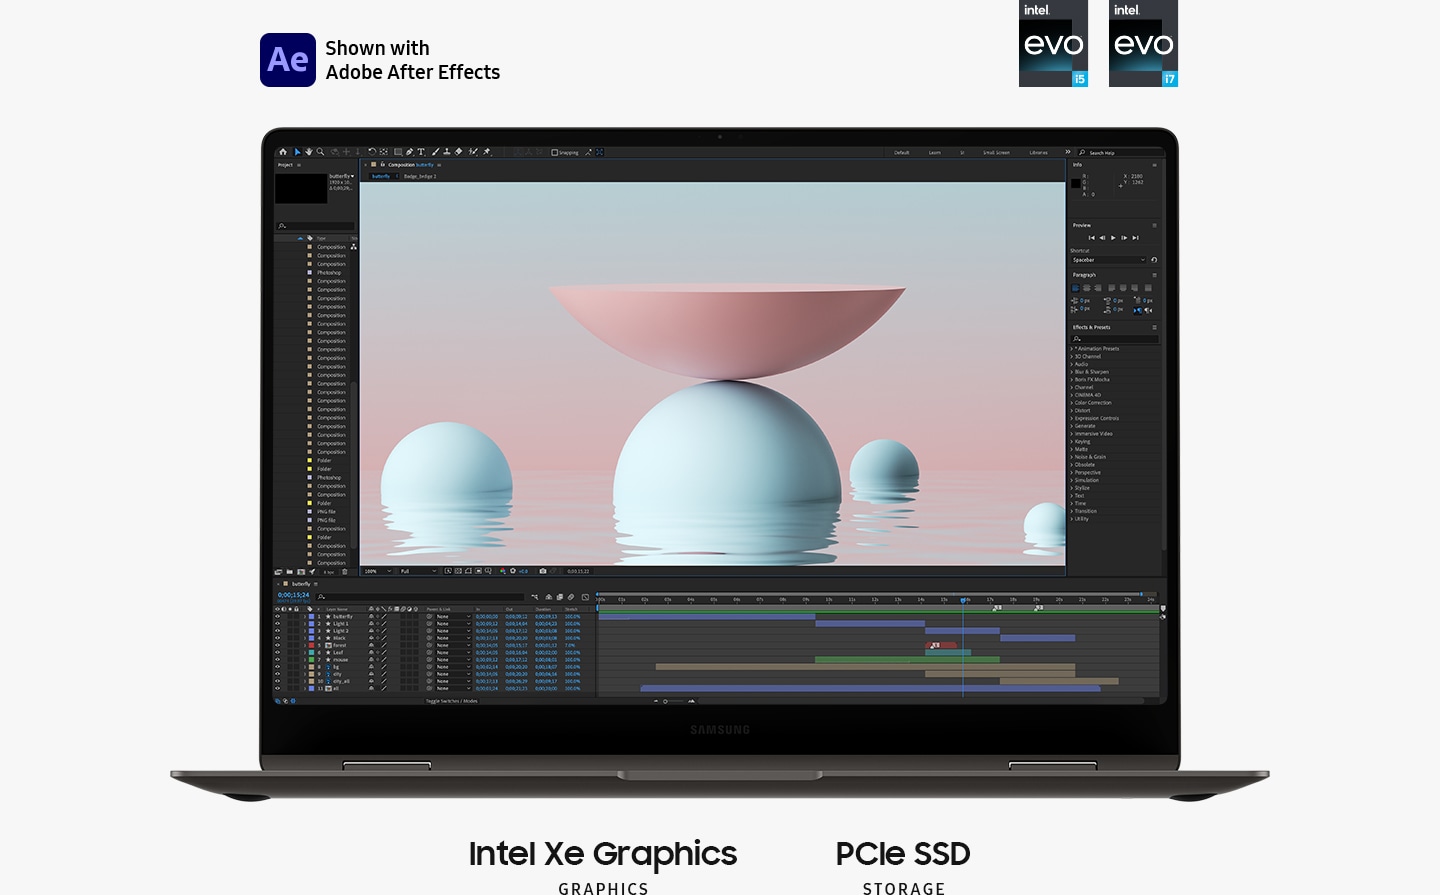 A graphite-coloured Galaxy Book3 Pro 360 is opened, facing forward with Adobe After Effects opened onscreen. Above, Intel Evo i5 and Intel Evo i7 logos are shown. ""Intel Xe Graphics. PCIe SSD STORAGE."" Adobe After Effects logo is shown. 